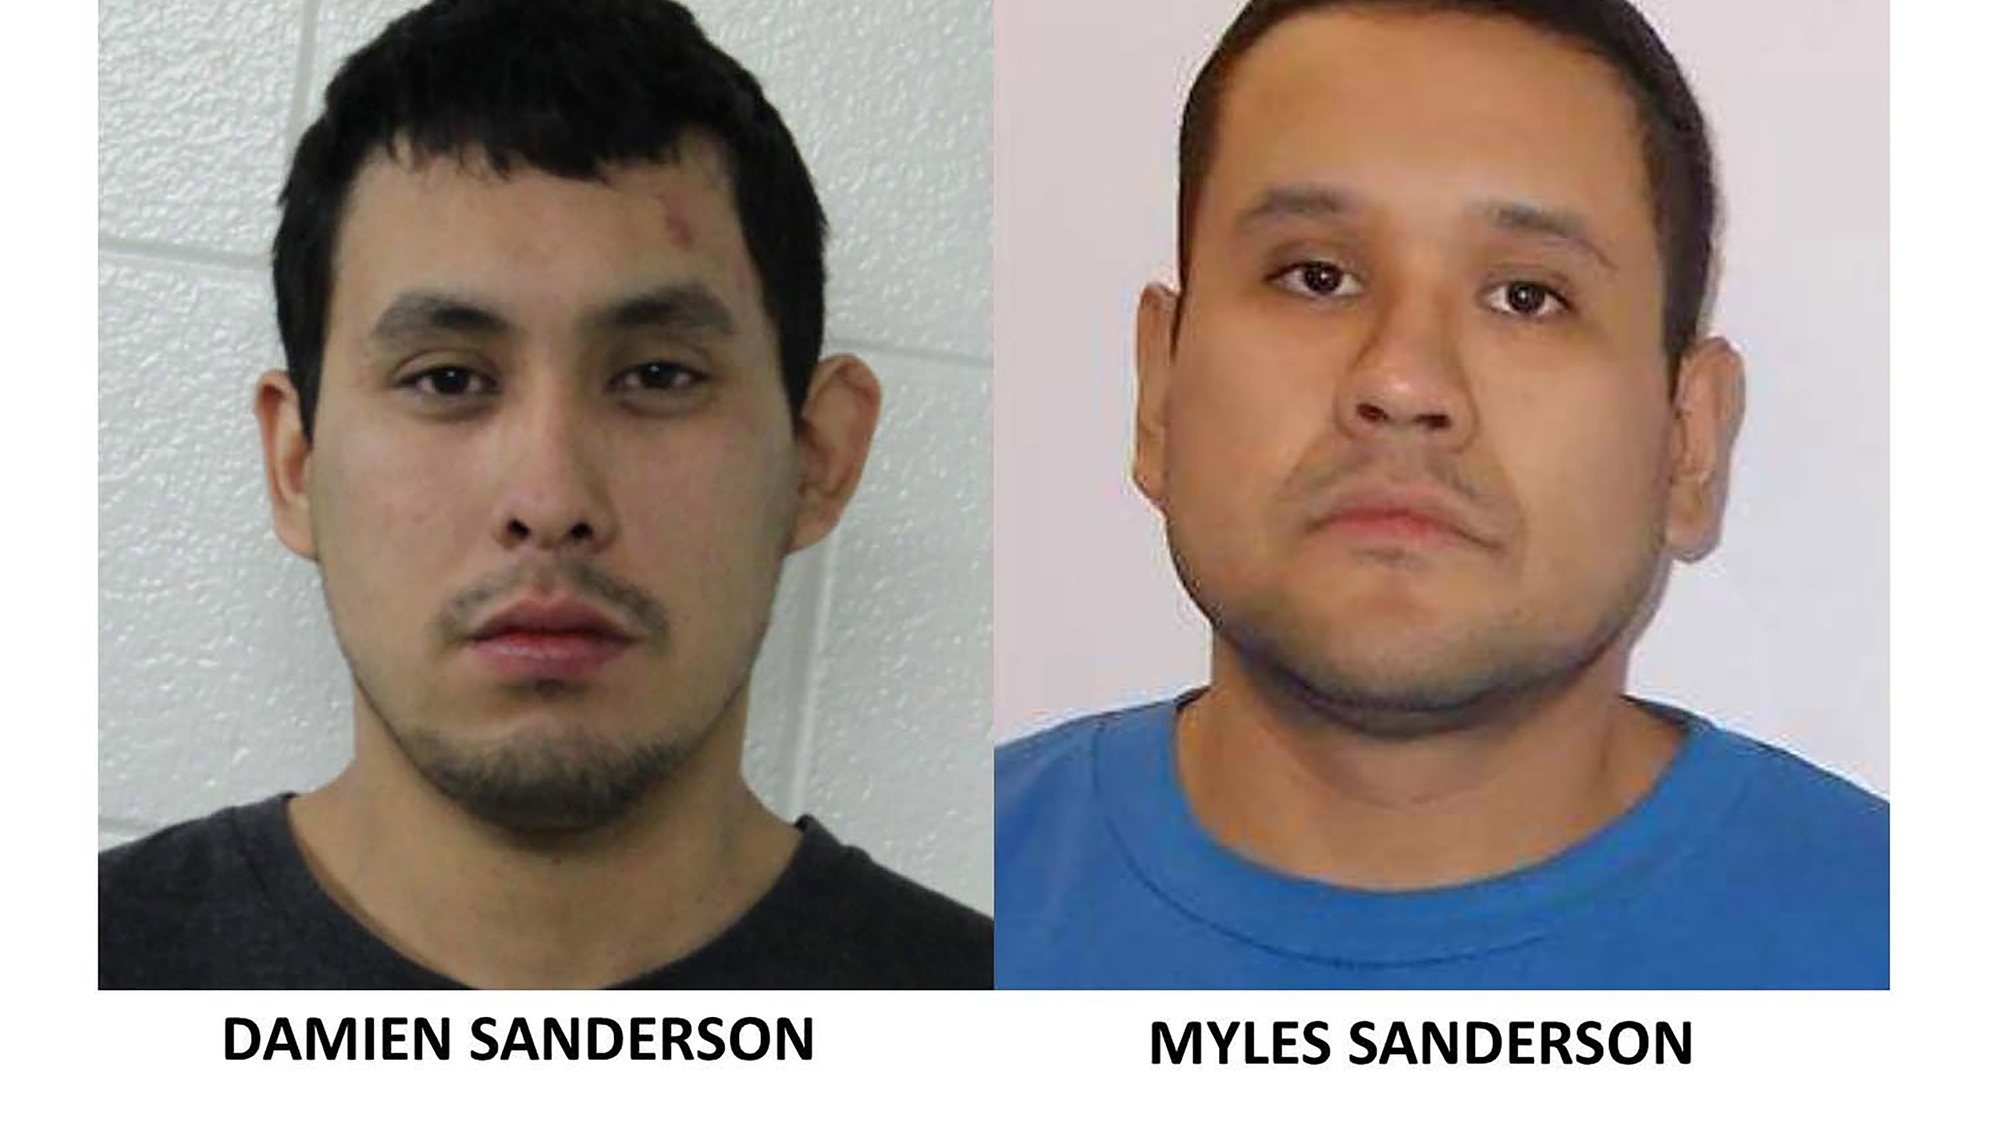 epa10160300 A handout combination photo made available by the Royal Canadian Mounted Police showing suspects Damien Sanderson (L) and Myles Sanderson (R) who are actively being sought by police in connection with stabbings in the James Smith Cree Nation, Saskatchewan, Canada, 04 September 2022.  EPA/ROYAL CANADIAN MOUNTED POLICE / HANDOUT EDITORIAL USE ONLY, NO SALES HANDOUT EDITORIAL USE ONLY/NO SALES